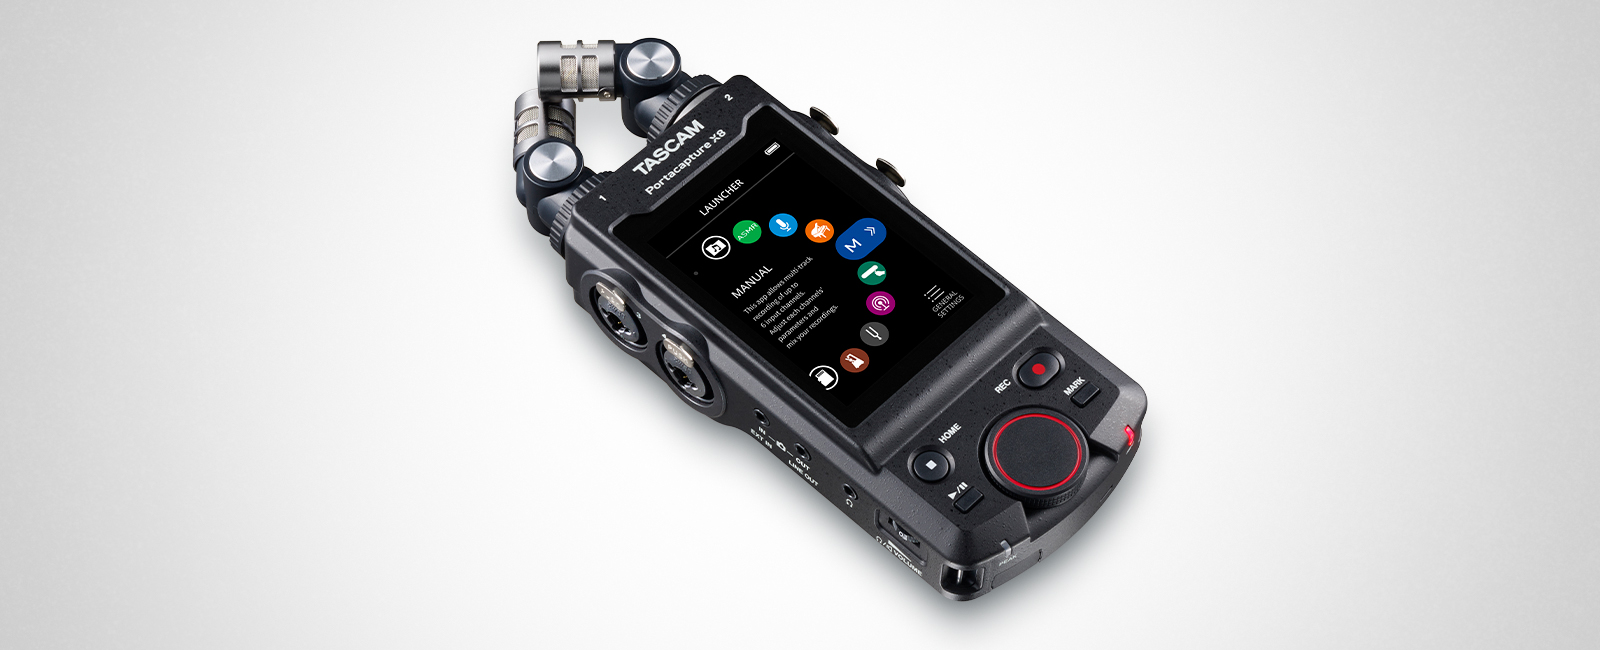 TASCAM Announces the Version 1.30 Firmware Update for the Portacapture X8 Multi-track Handheld Recor